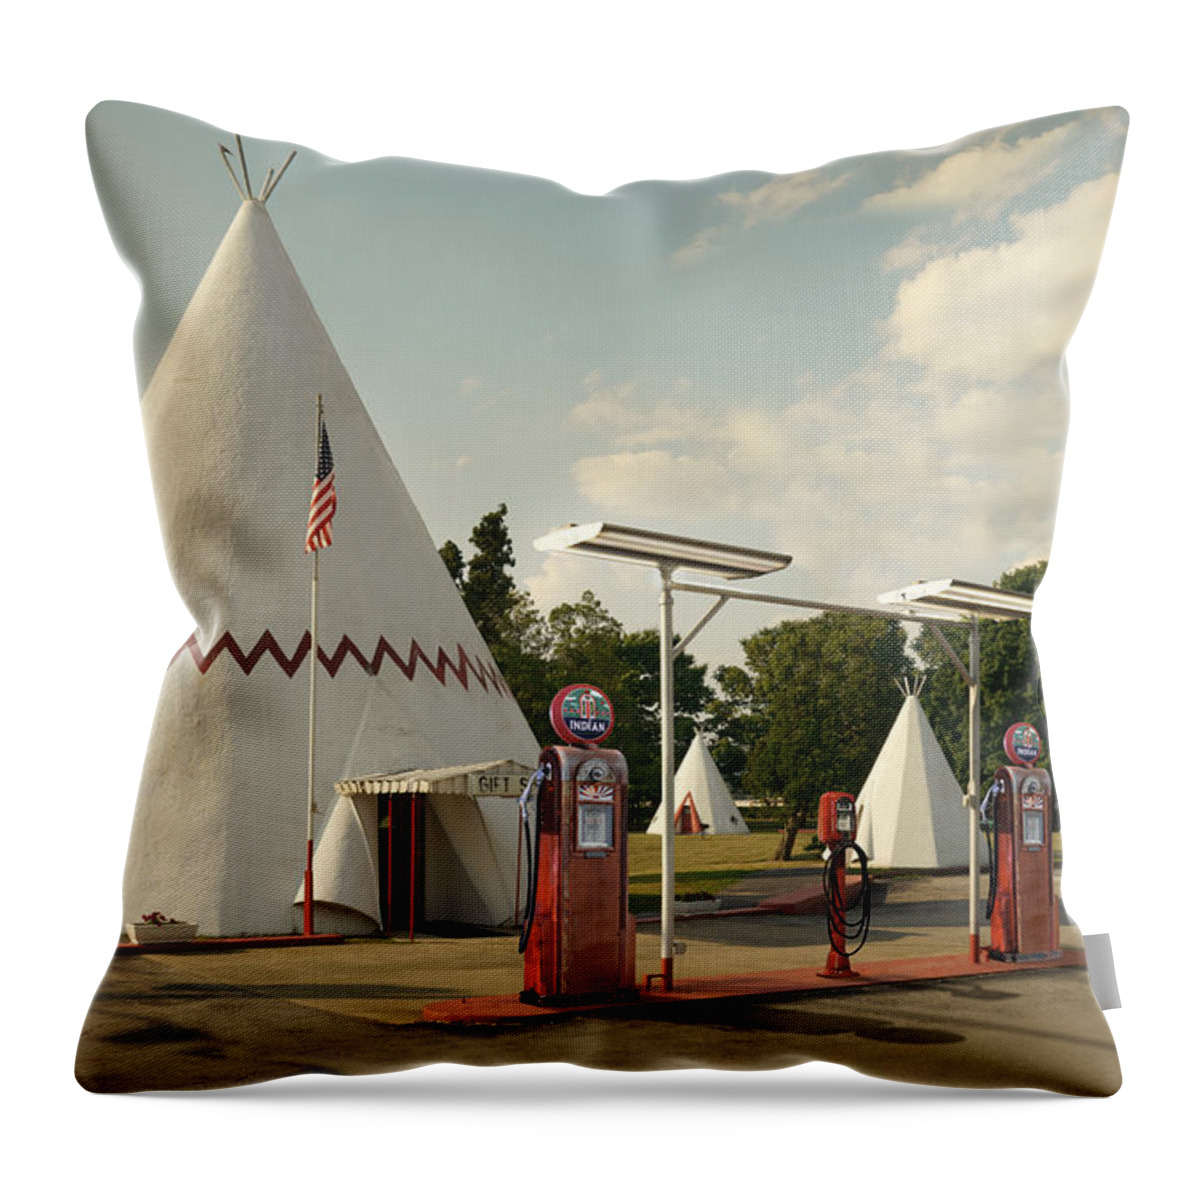 Wig Wam Motel Throw Pillow featuring the photograph Wig Wam Motel and Indian Gasoline Station by Mike McGlothlen